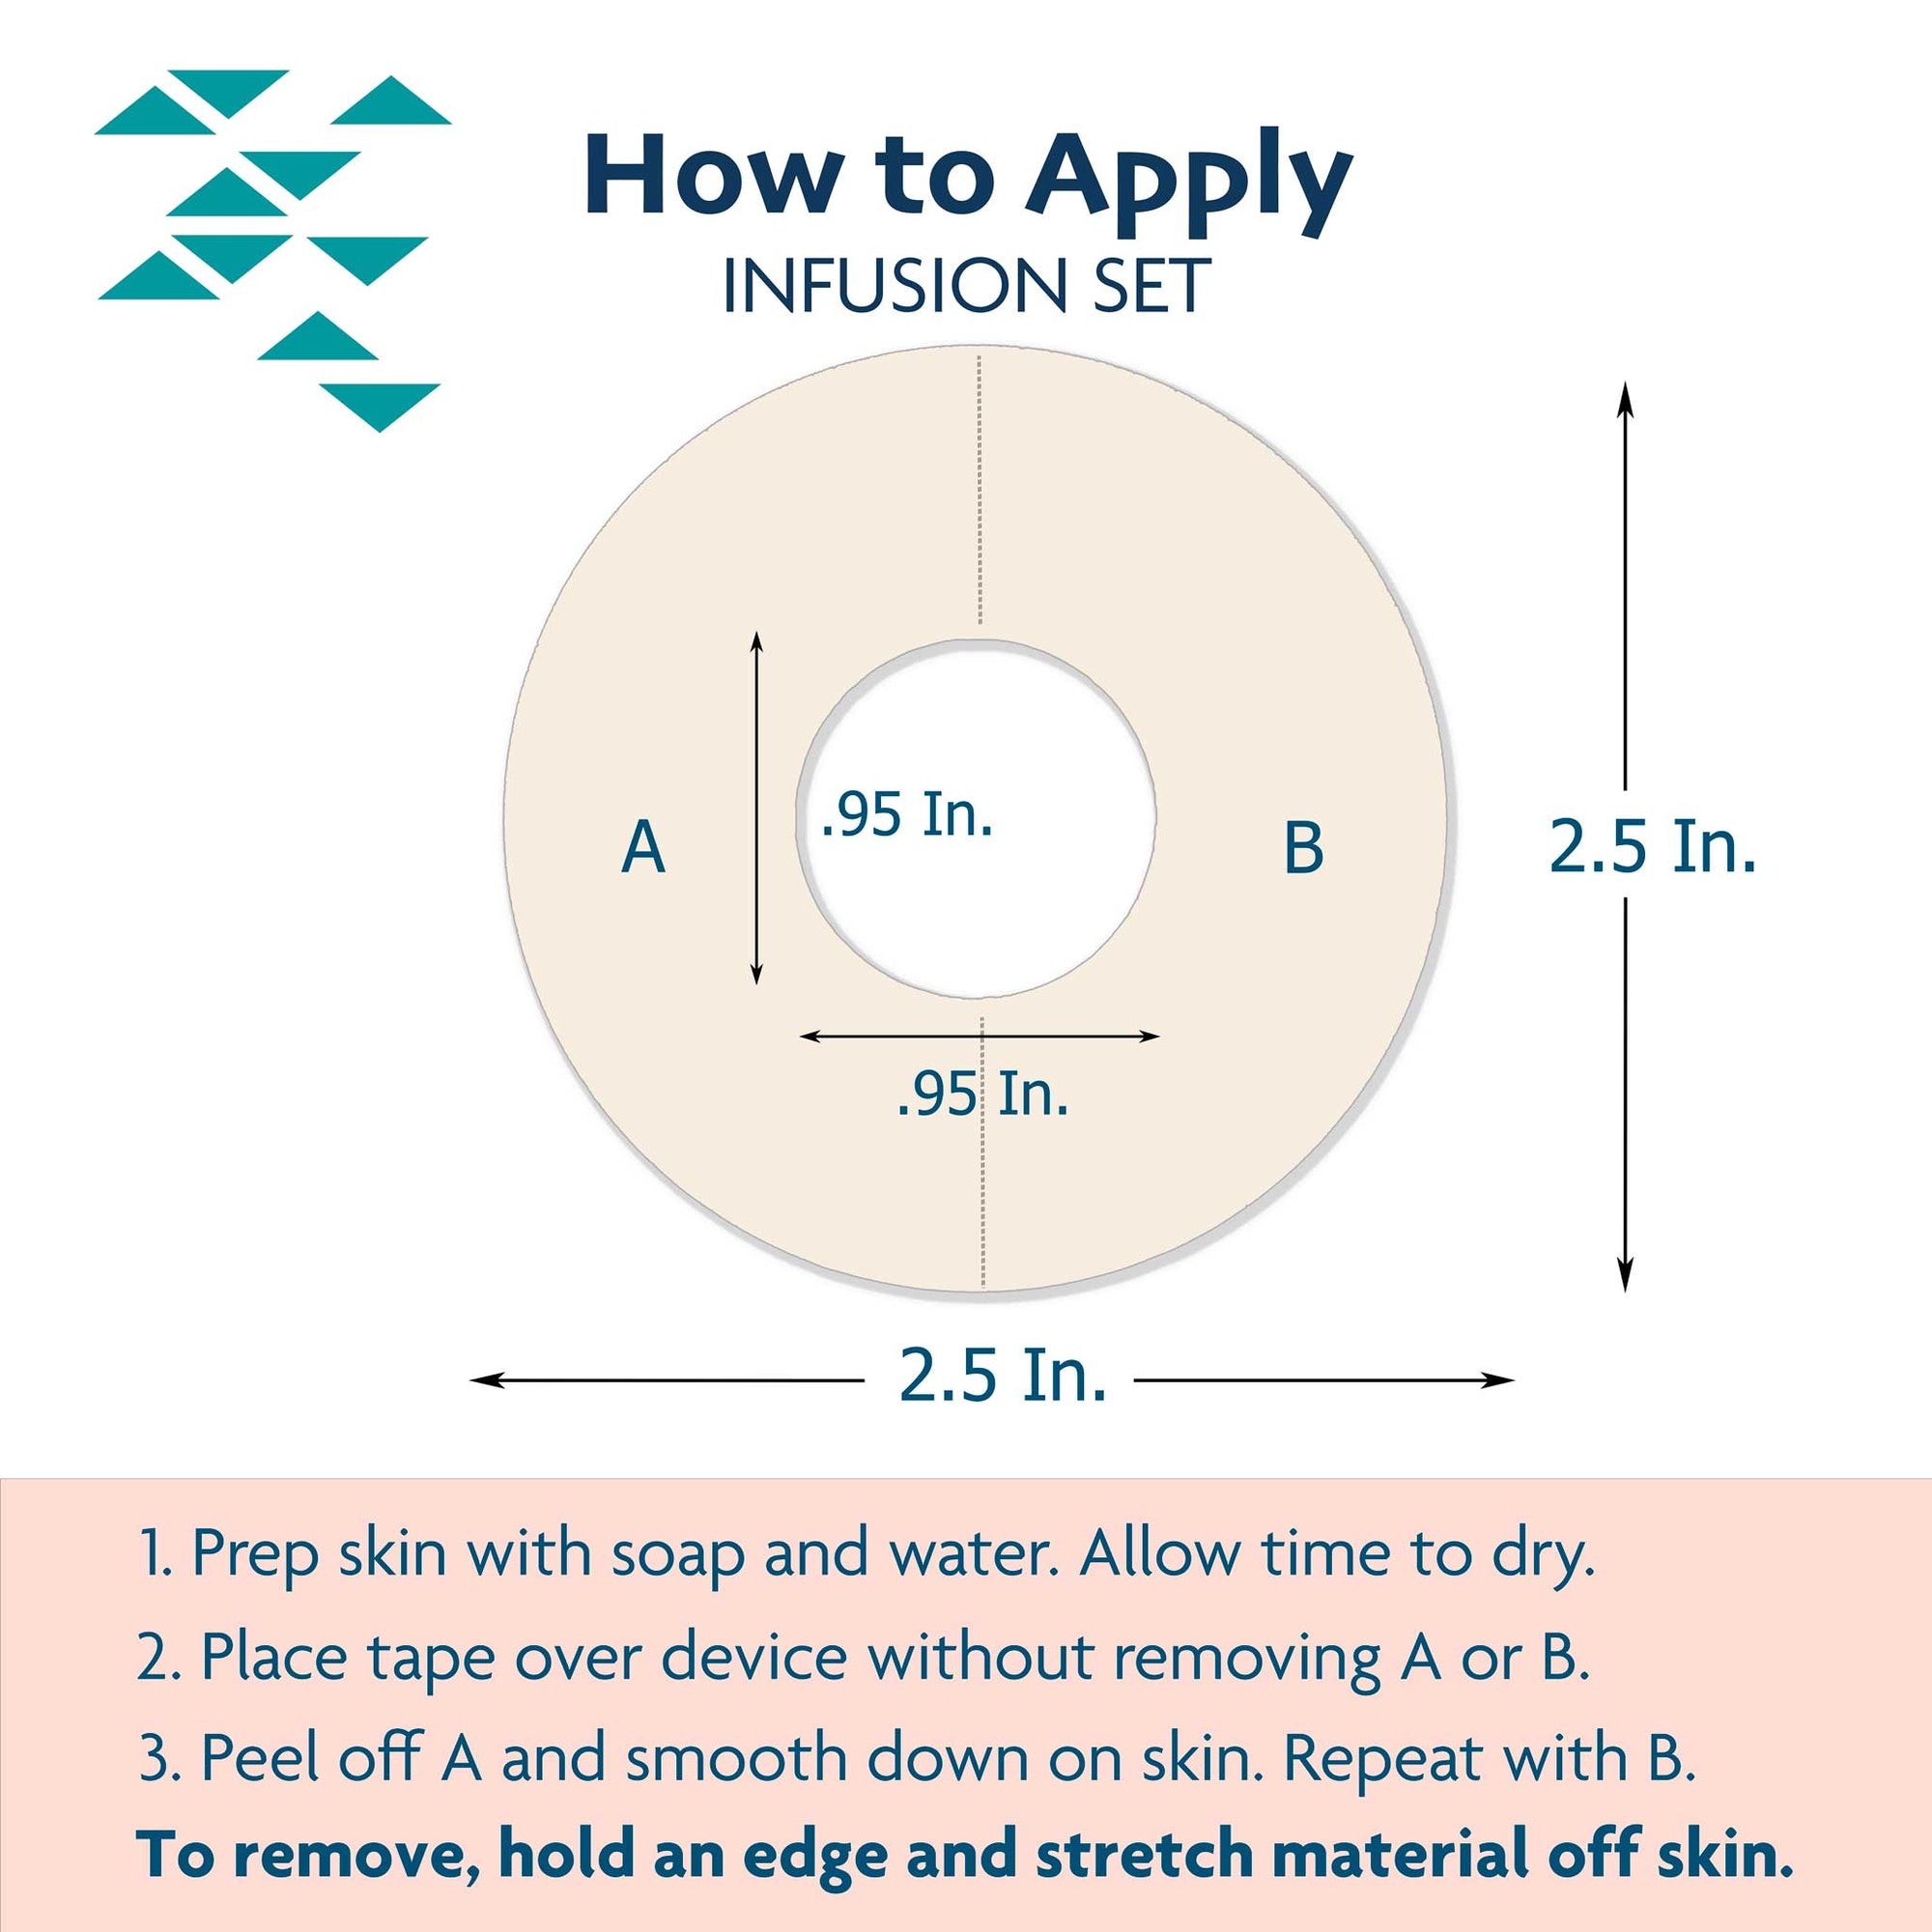 How to Apply Infusion Set Tape 1. Prep skin with soap and water. Allow time to dry. 2. Place tape over device without removing A or B. 3. Peel off A and smooth down on skin. Repeat with B. To remove, hold an edge and stretch material off skin.